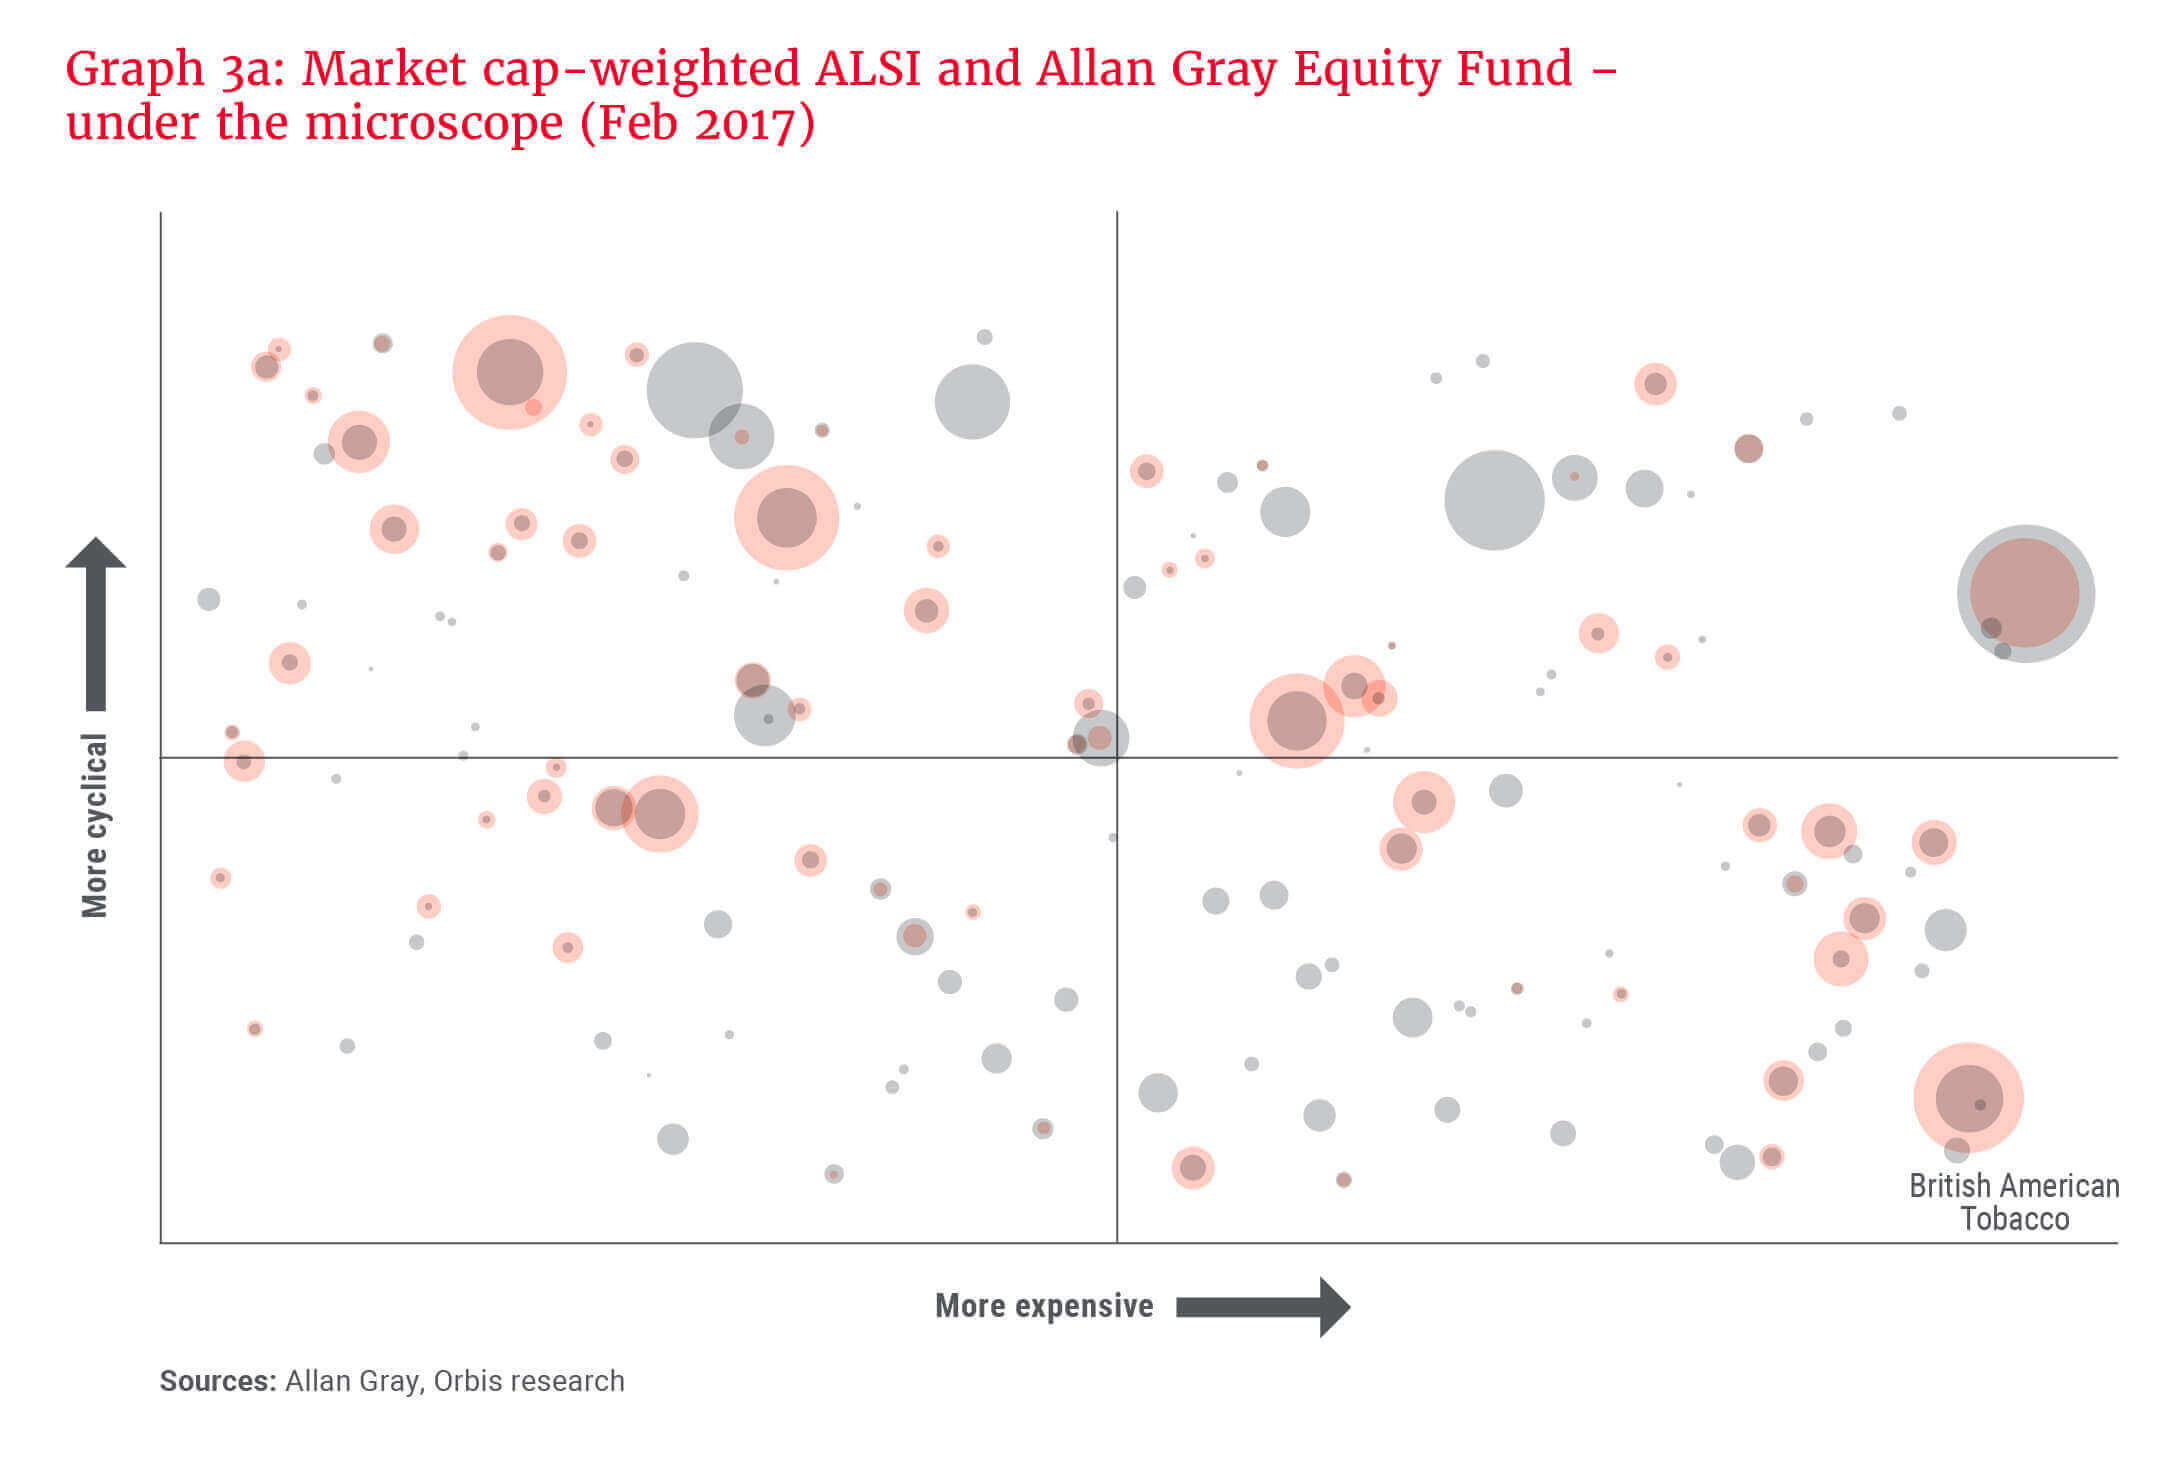 Graph 3a_Market cap-weighted ALSI and AGEF - under the microscope (Feb 2017).jpg